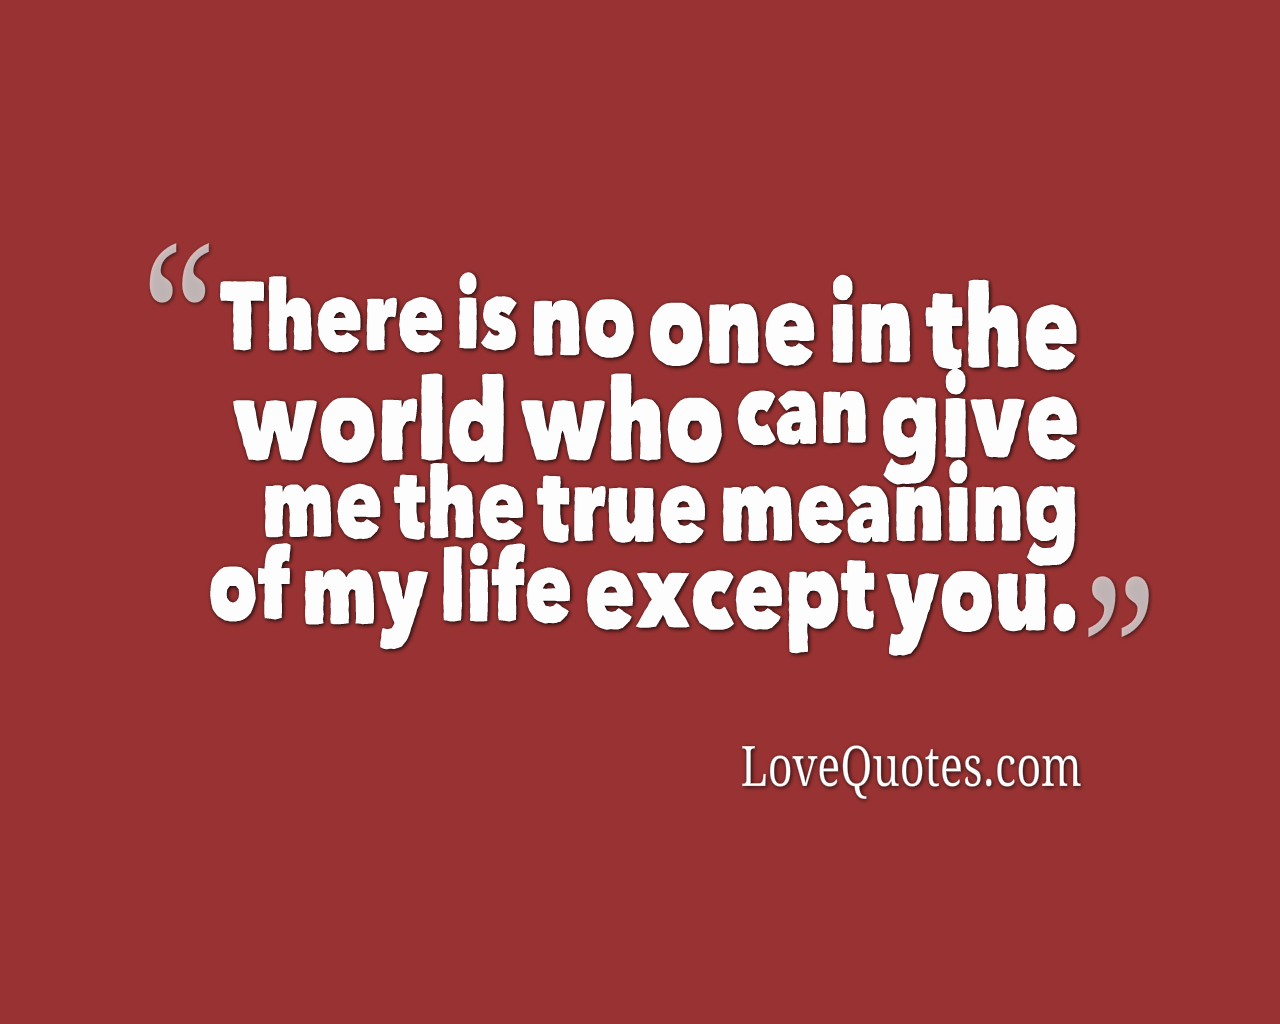 The True Meaning Of My Life - Love Quotes